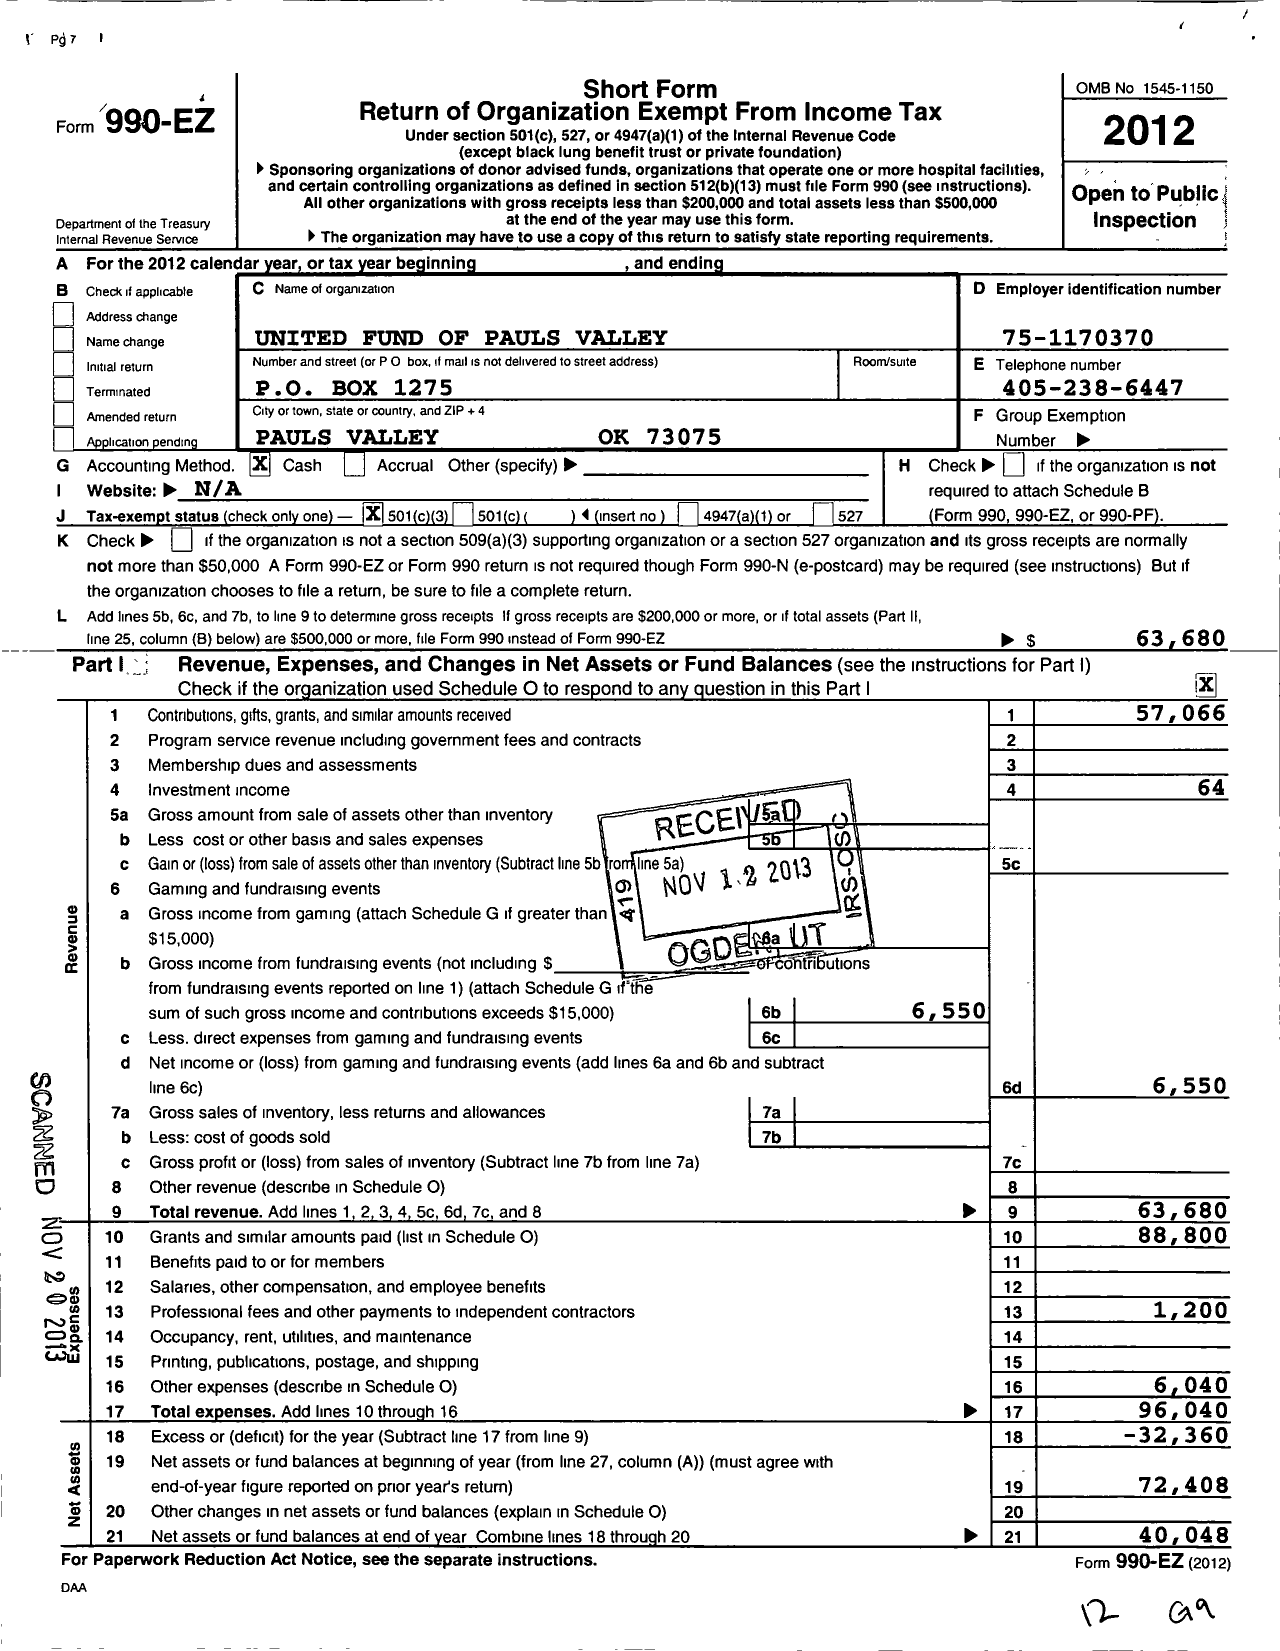 Image of first page of 2012 Form 990EZ for United Fund of Pauls Valley